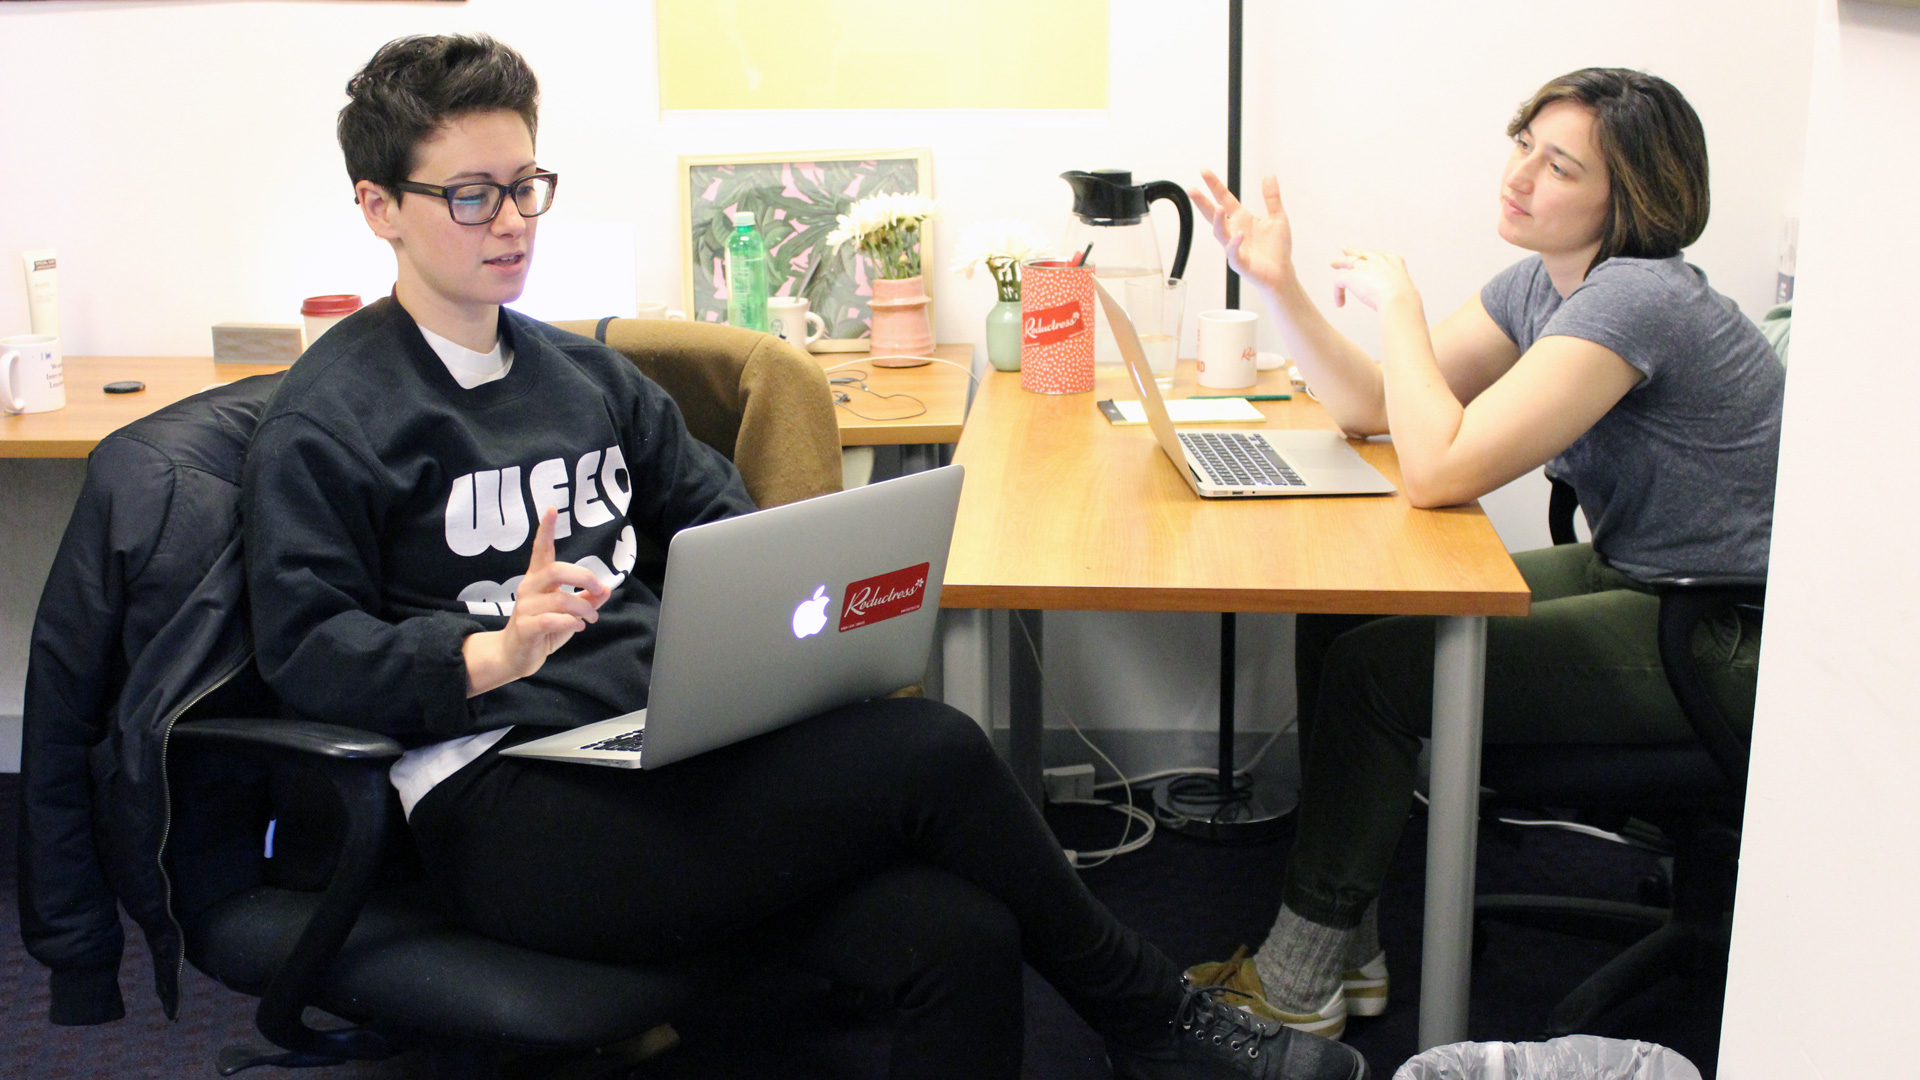 We’re Reductress Founders Beth Newell And Sarah Pappalardo, And This Is How We Work